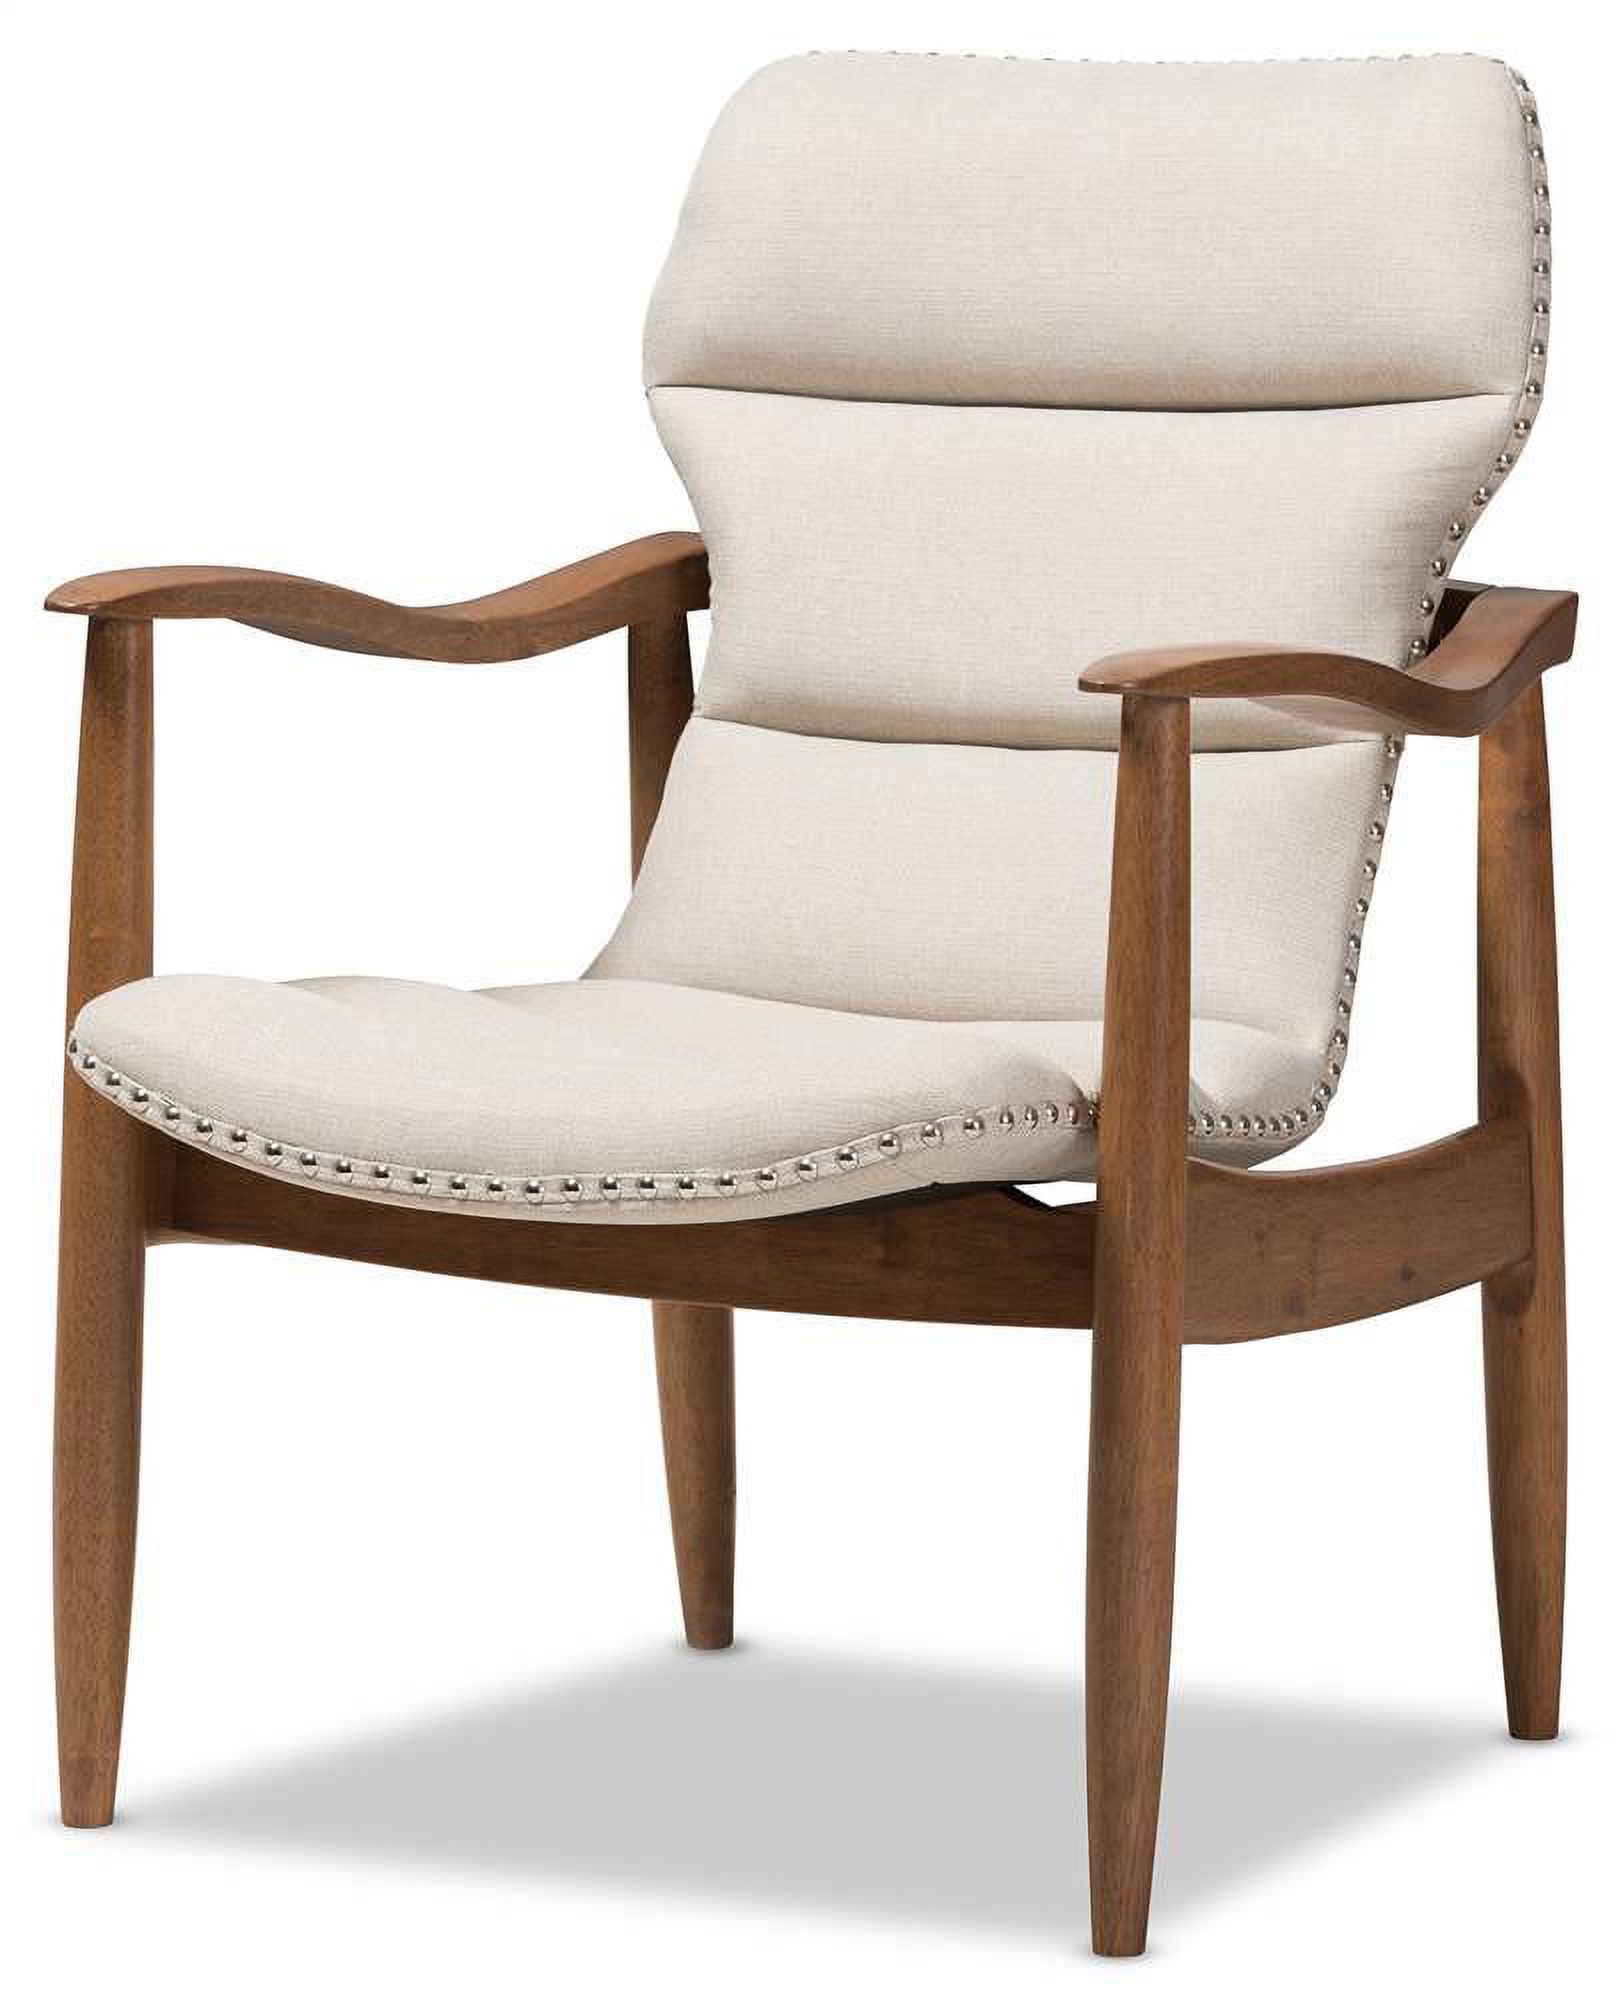 Mid-Century Modern Lounge Chair in Light Beige and Walnut Brown - image 1 of 6